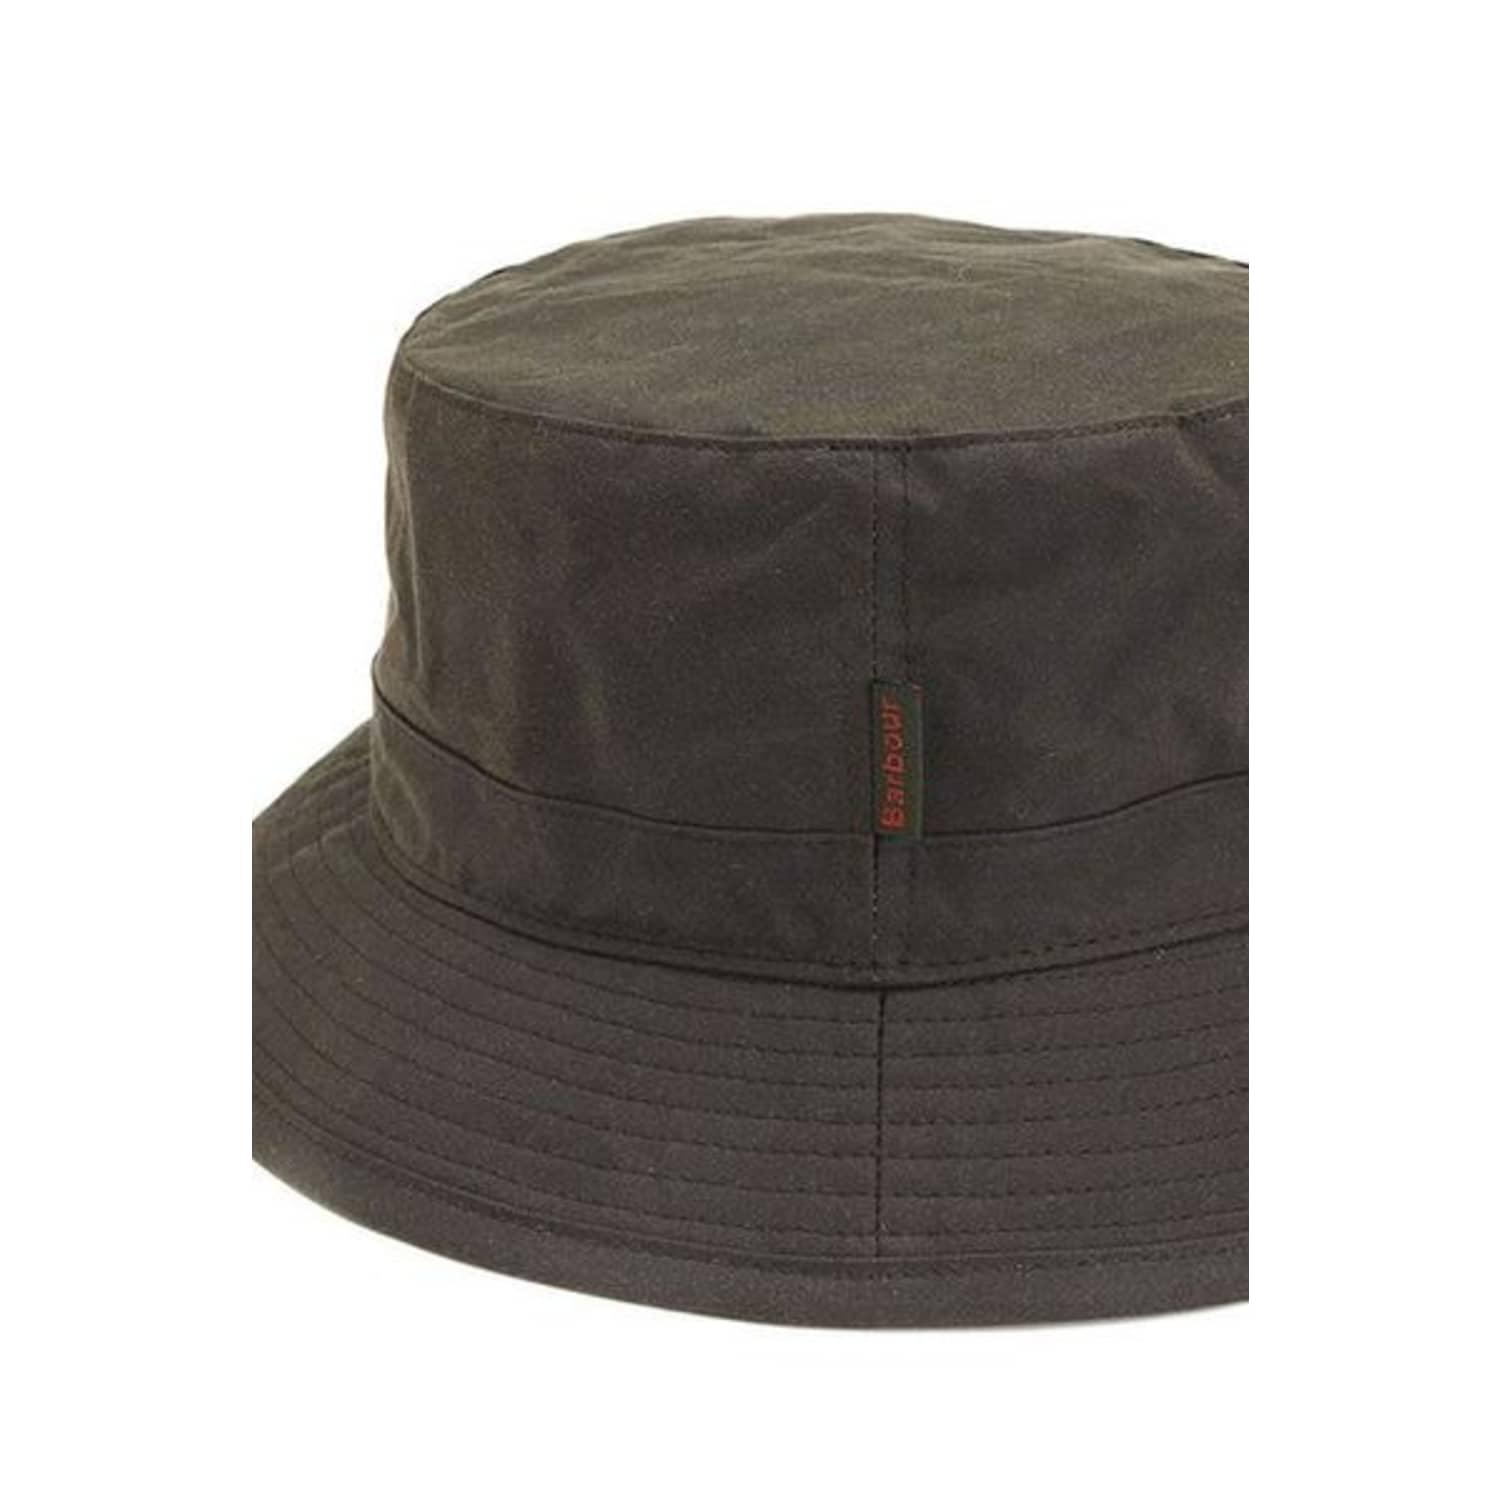 Barbour Cotton Wax Sports Hat for Men - Save 26% - Lyst